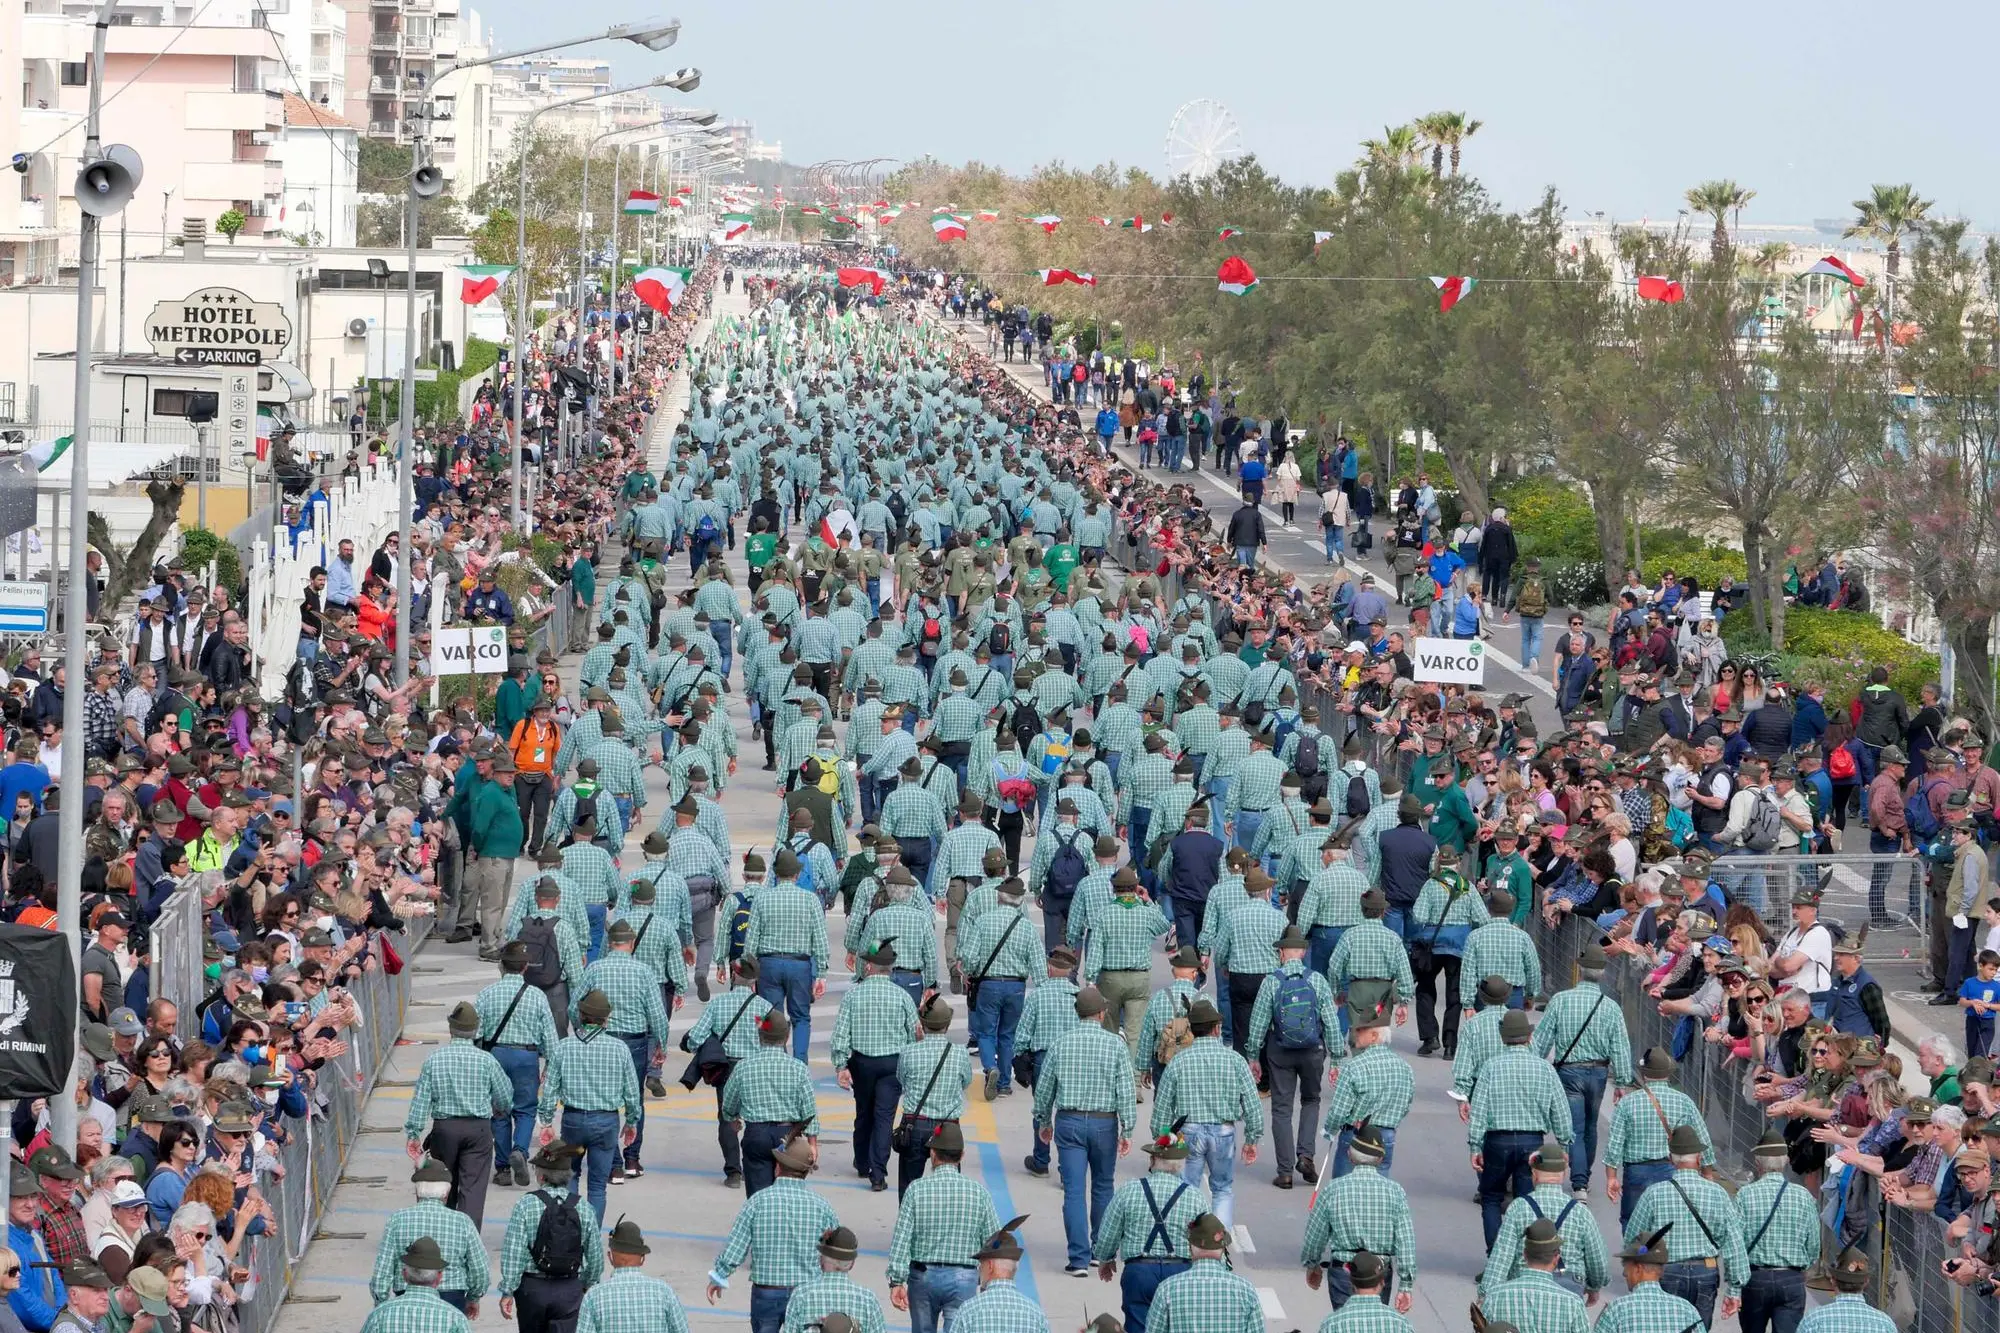 The national meeting of the Alpini on the Rimini seafront (Ansa)